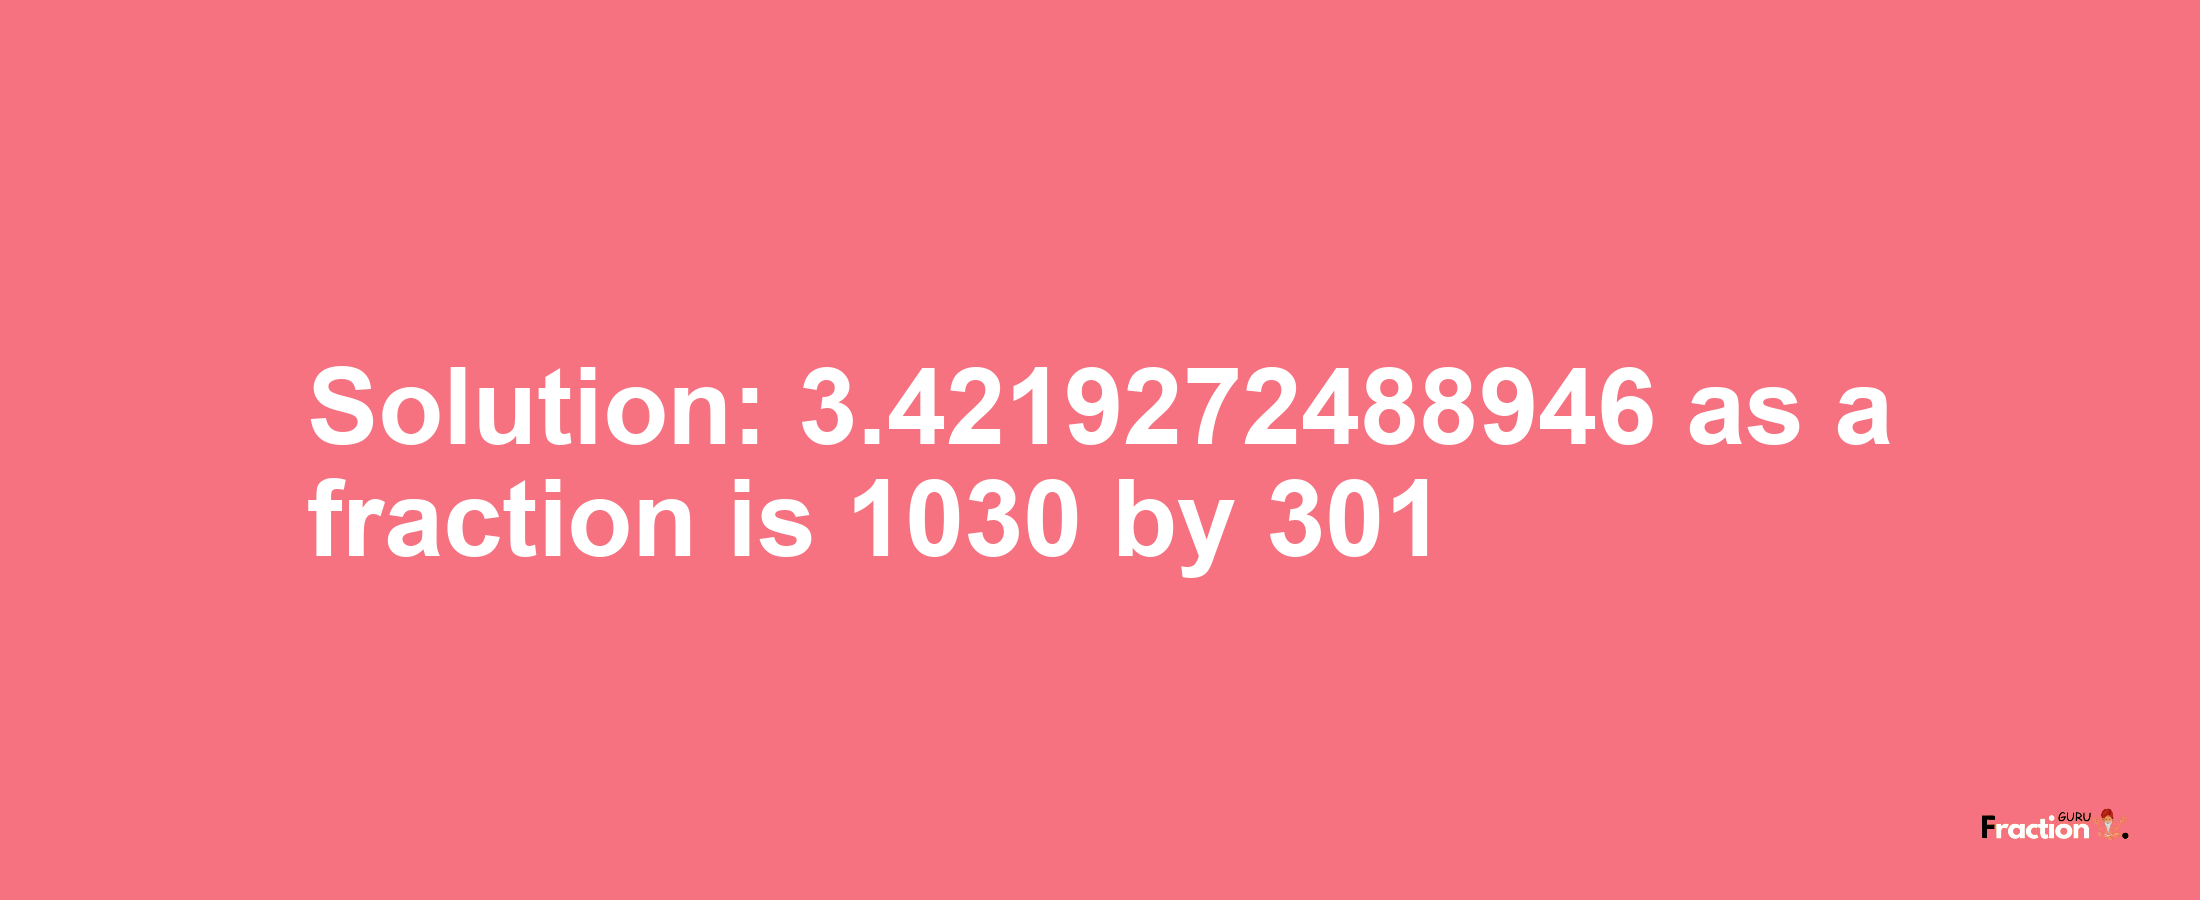 Solution:3.4219272488946 as a fraction is 1030/301